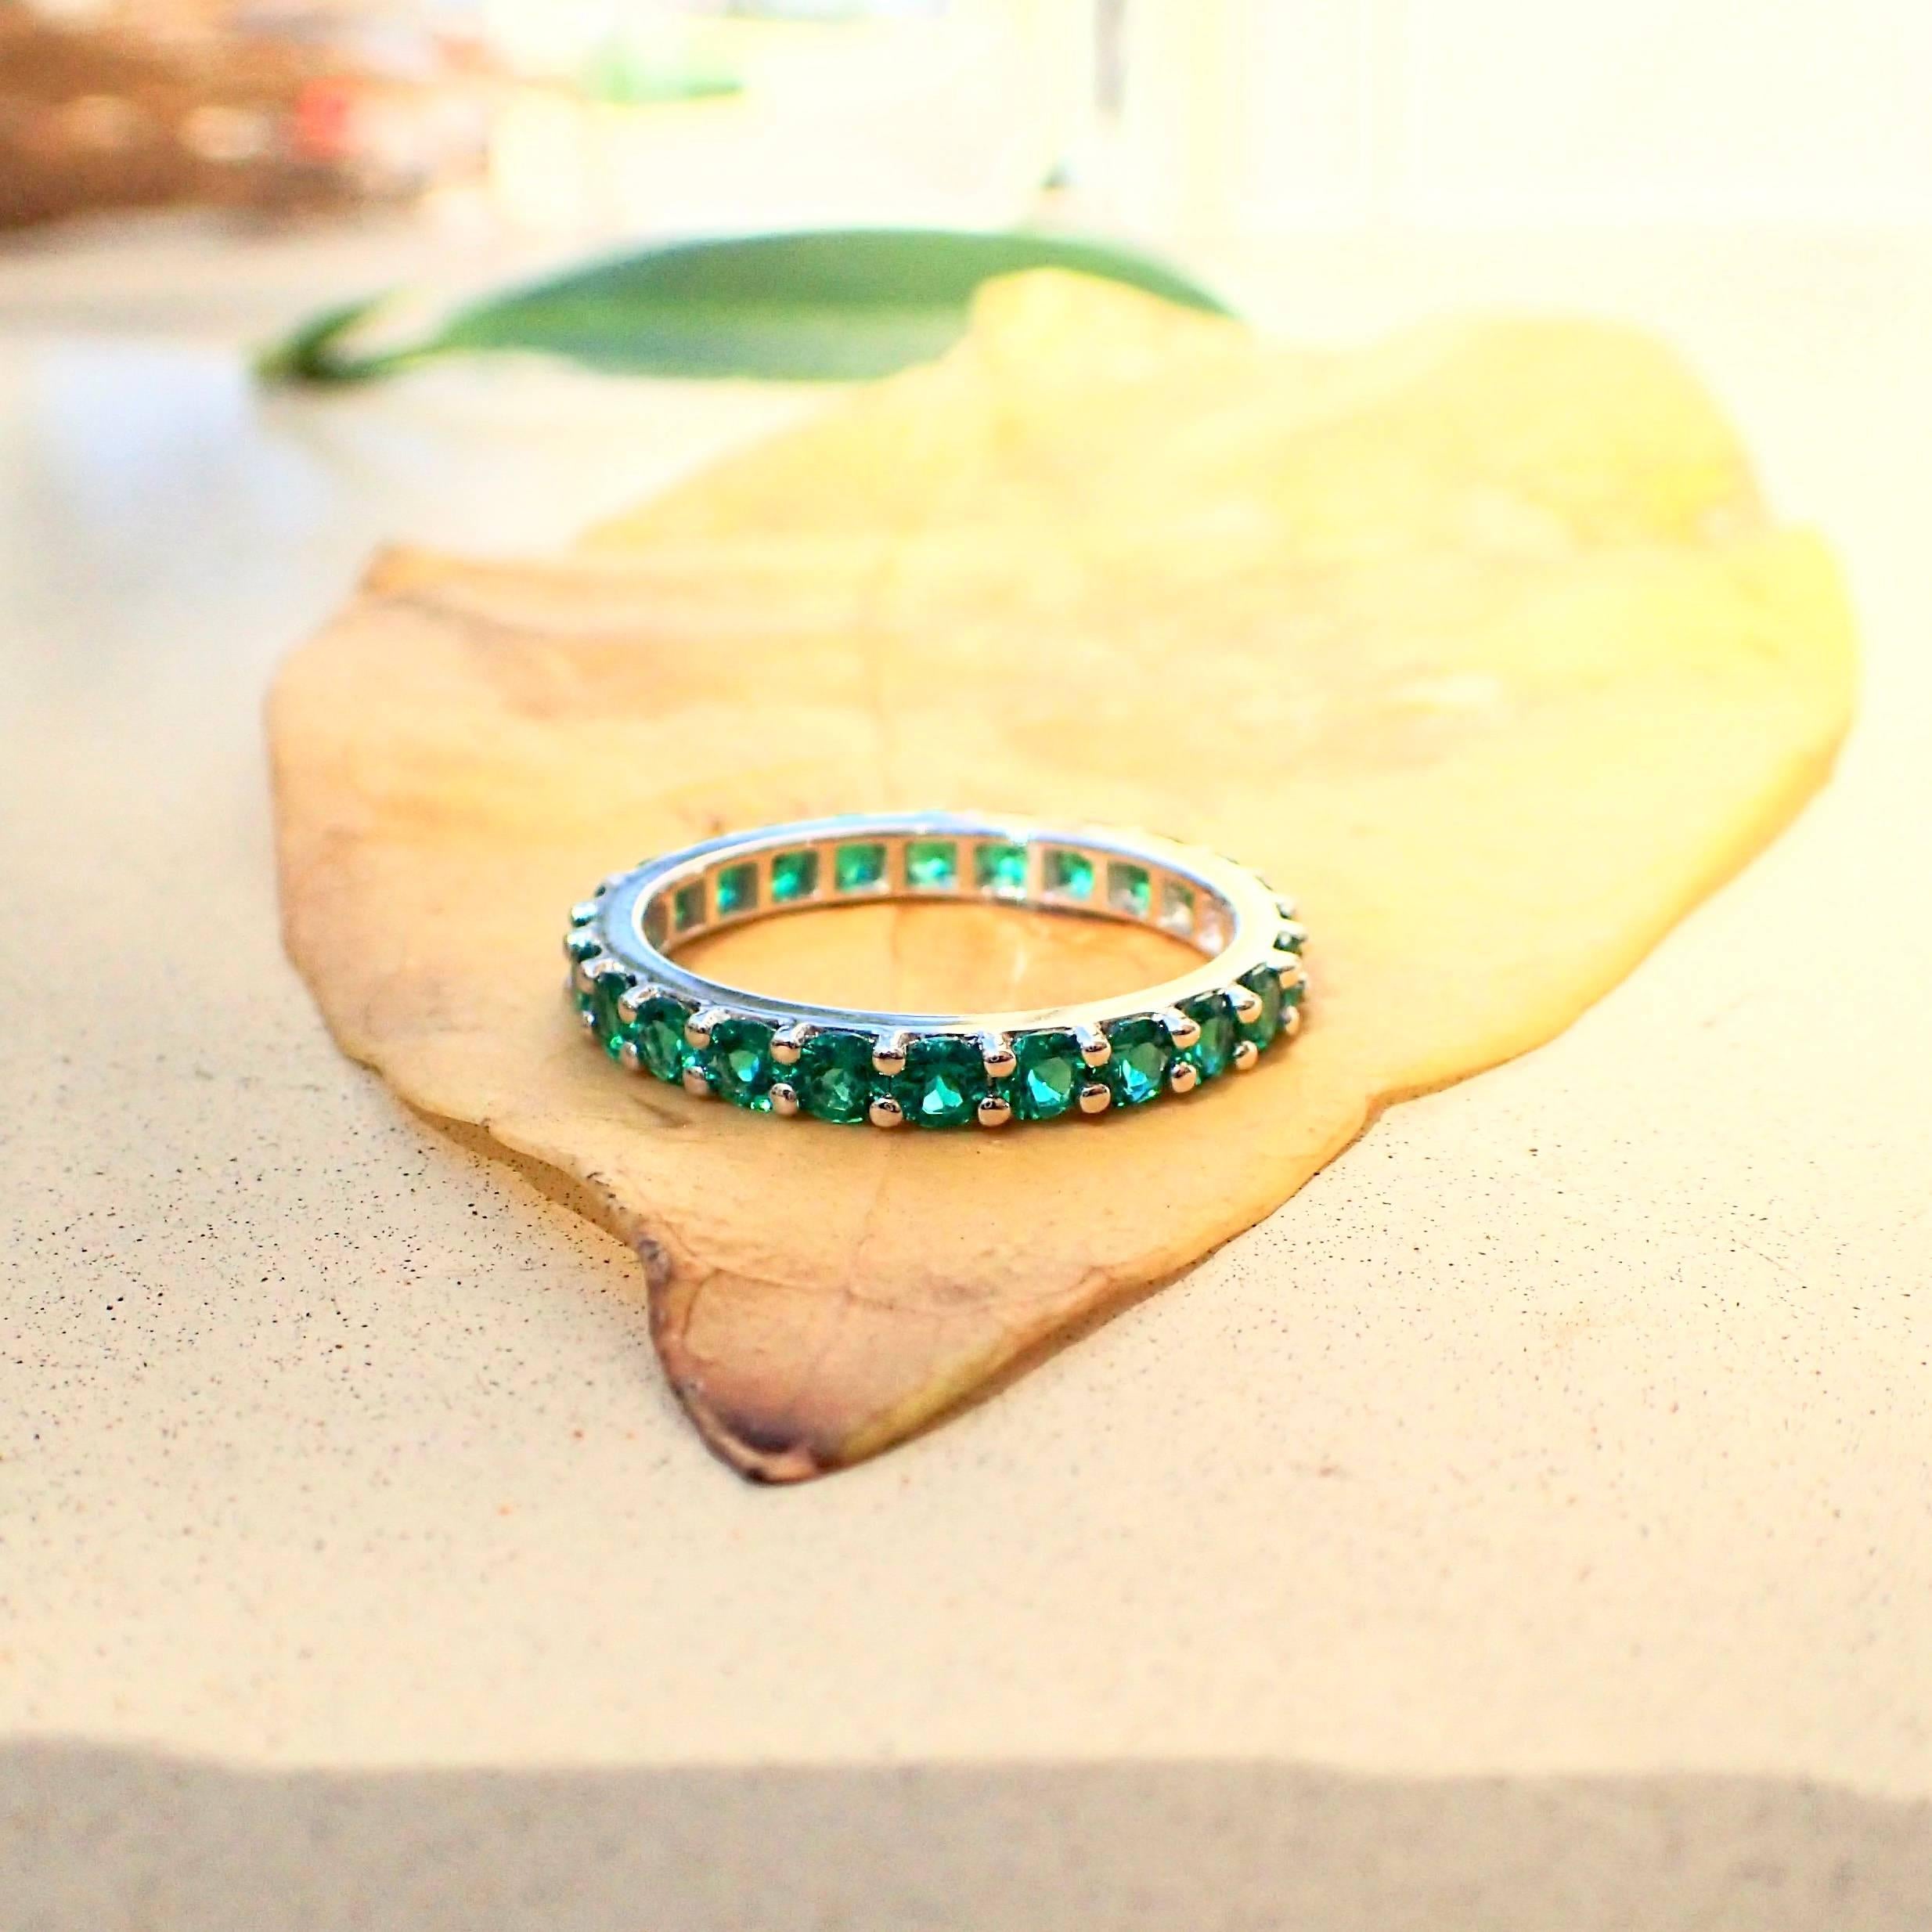 Round Cut 18 Karat Gold Eternity Band with Chatham-Created Emeralds Weighing 1.22 Carat